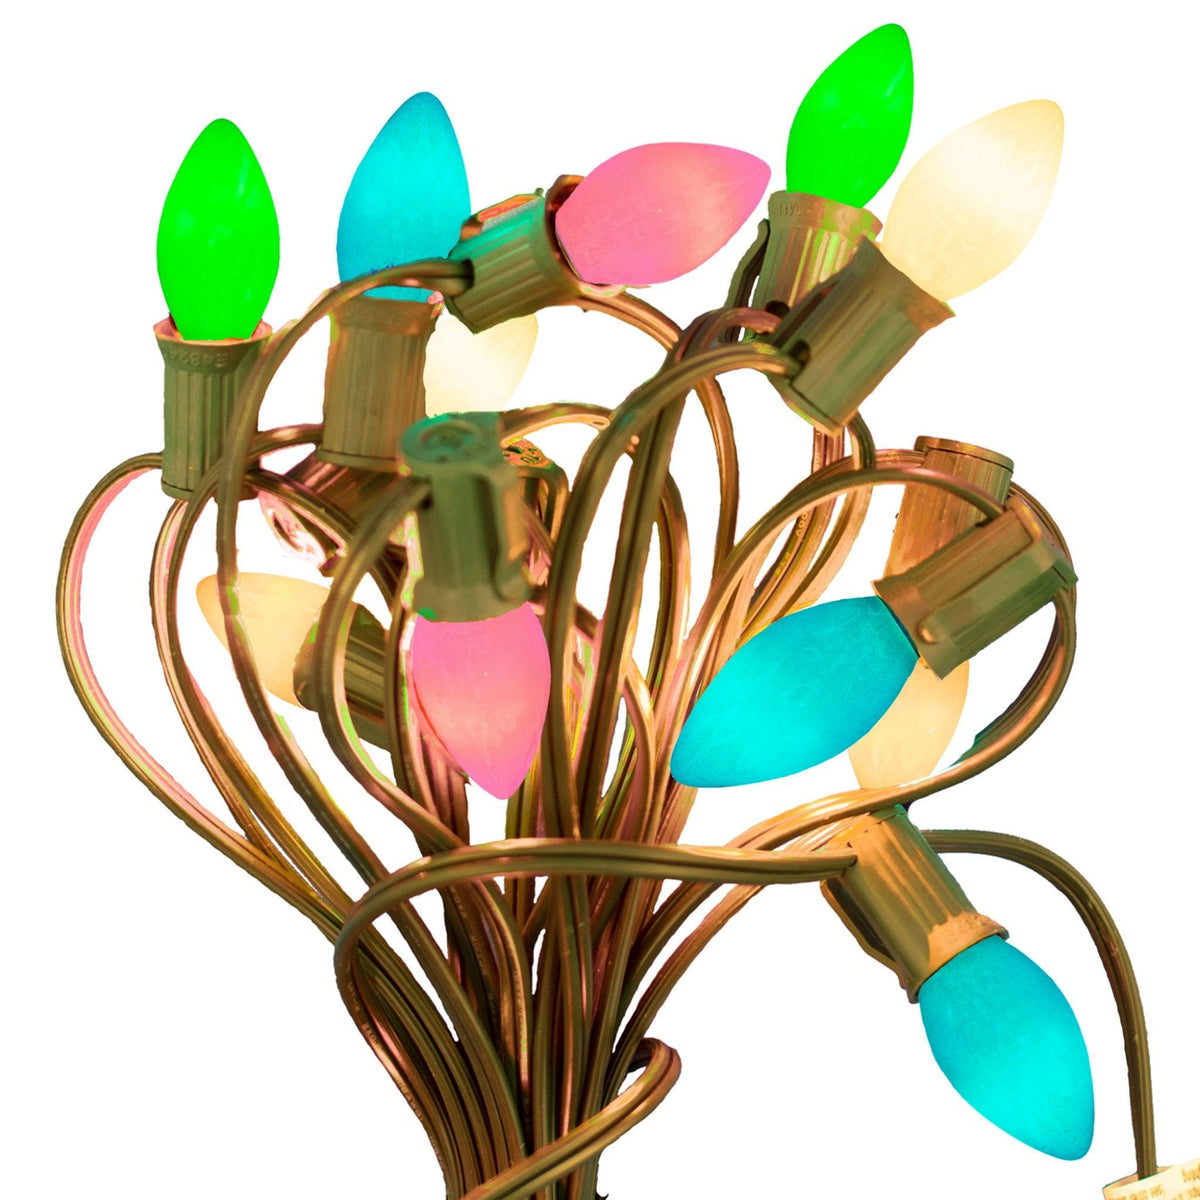 Lee Display's classic C-7 C-9 Candelabra Lights Bulbs in Easter colors for the holiday! Replace those old bulbs with a set of pastel solid colors Blue, Pink, White, Orange and Green. On sale now at leedisplay.com